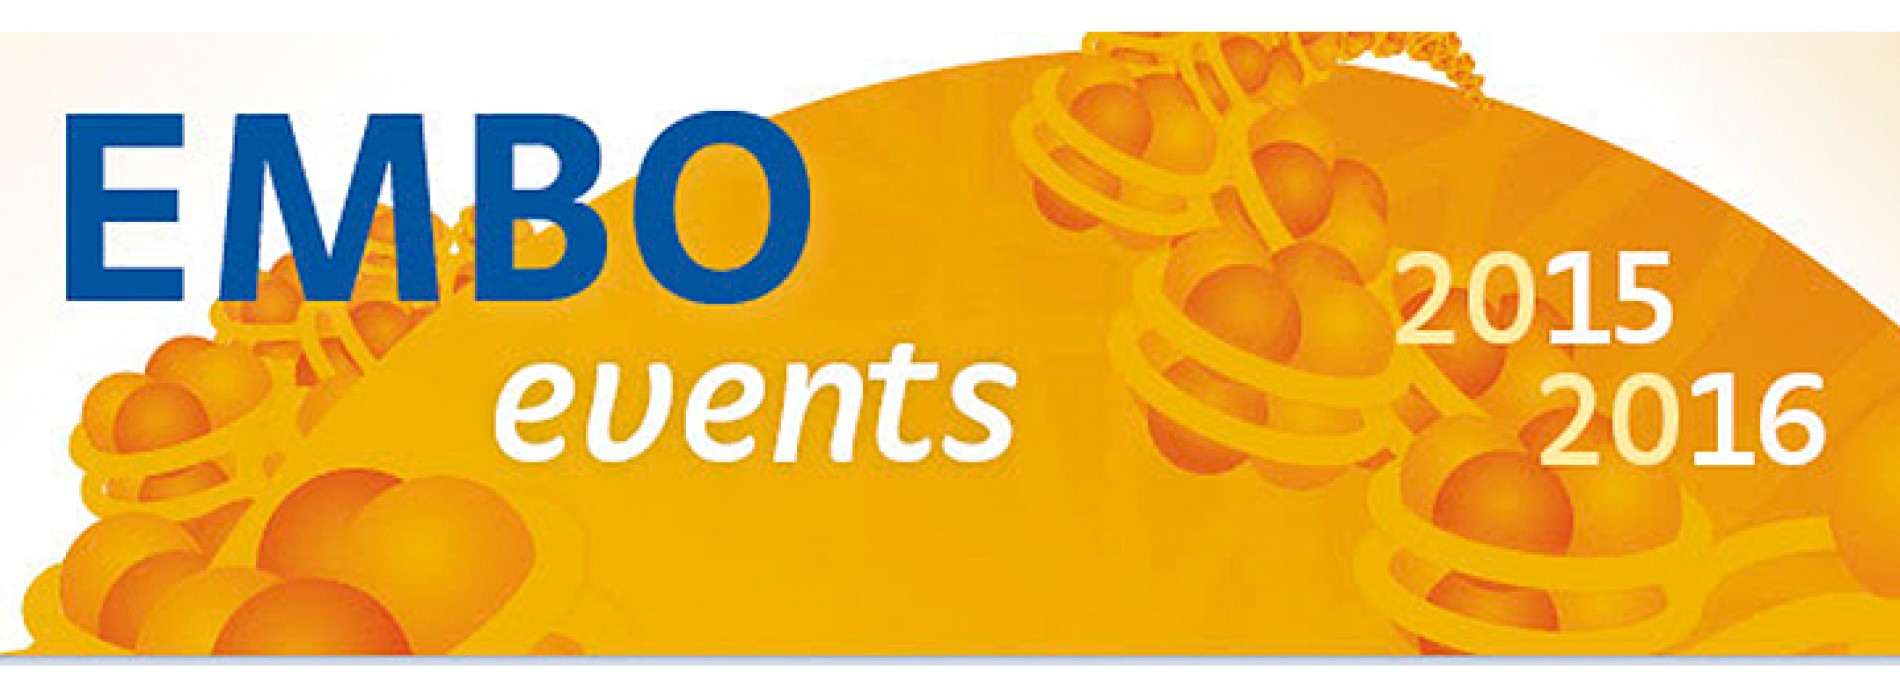 EMBO events.- Upcoming registration deadlines & future events